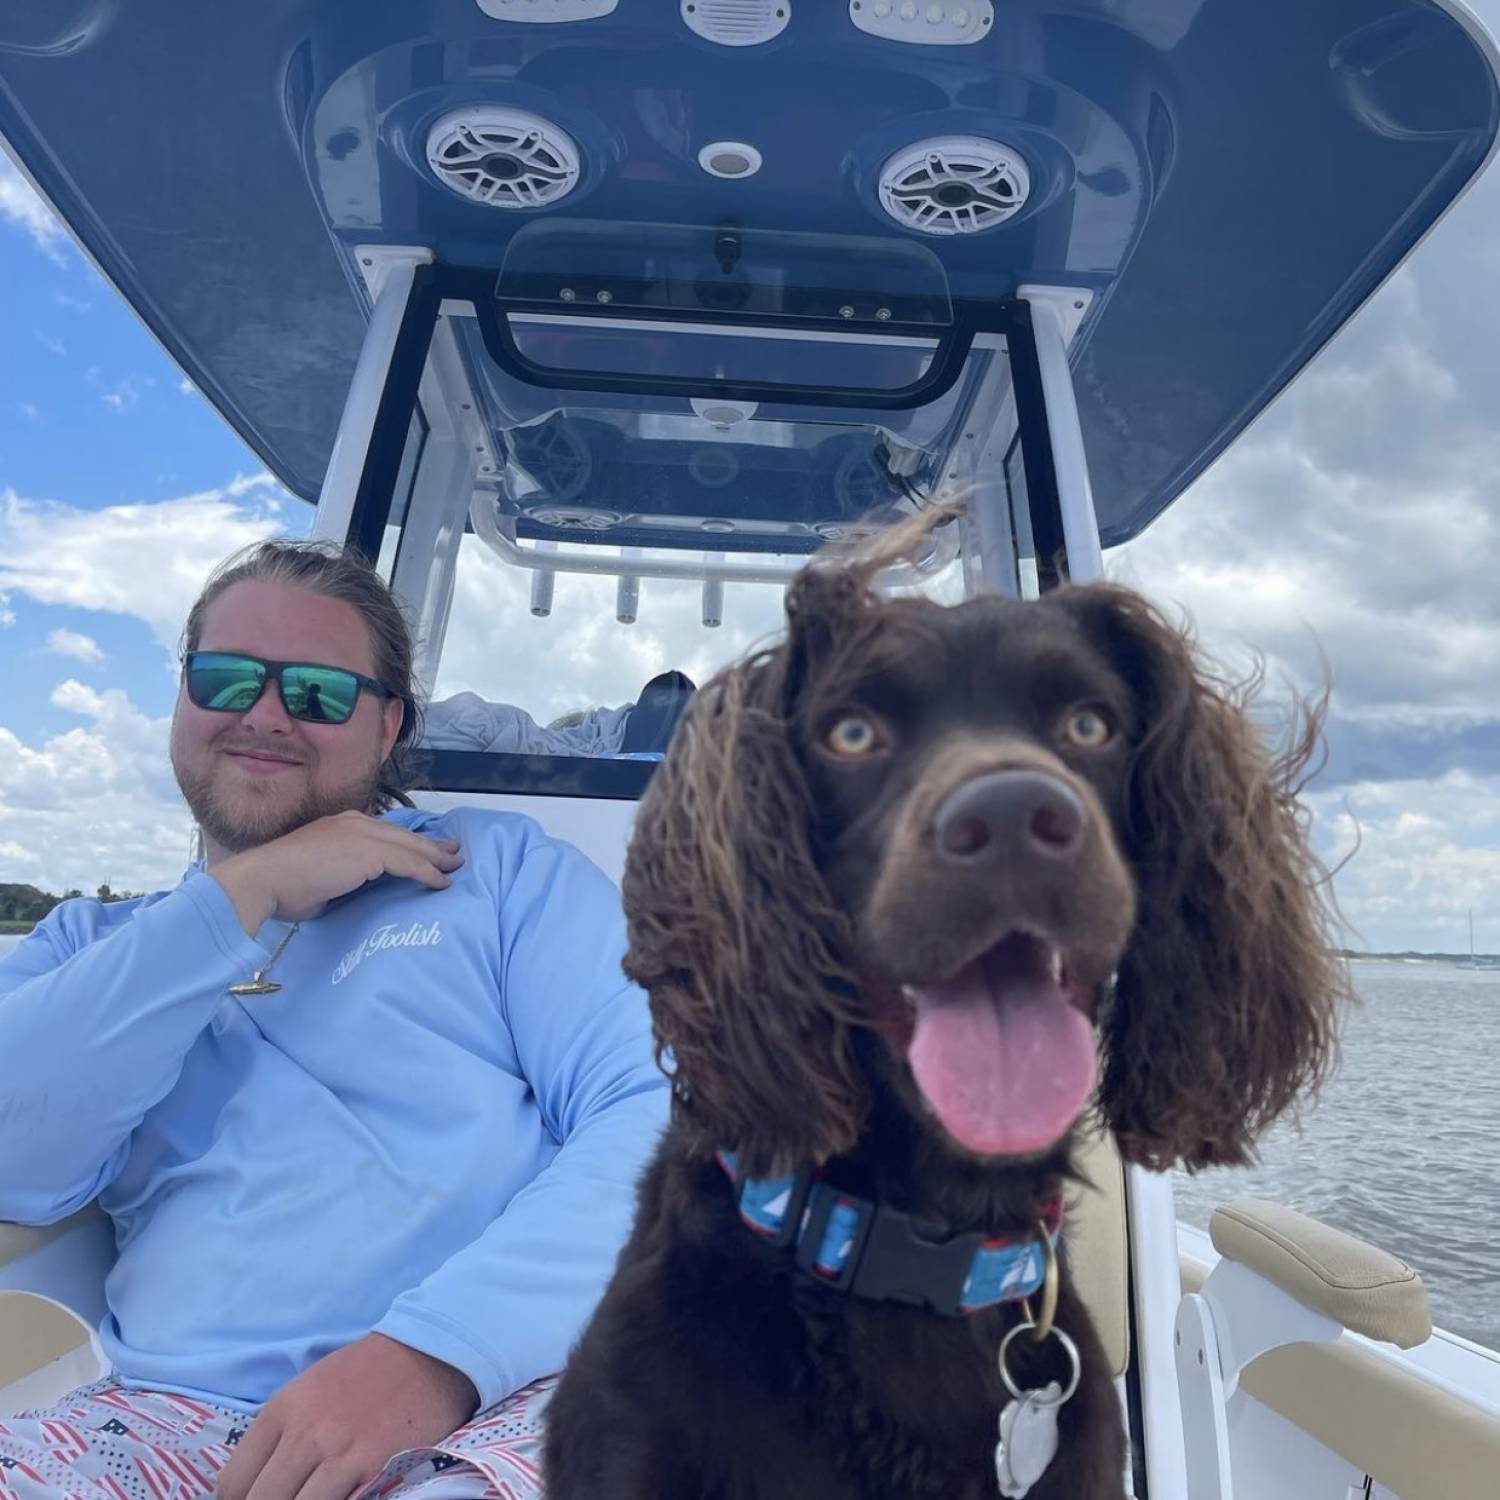 Title: Dog days - On board their Sportsman Masters 247OE Bay Boat - Location: Fernandina beach fl. Participating in the Photo Contest #SportsmanAugust